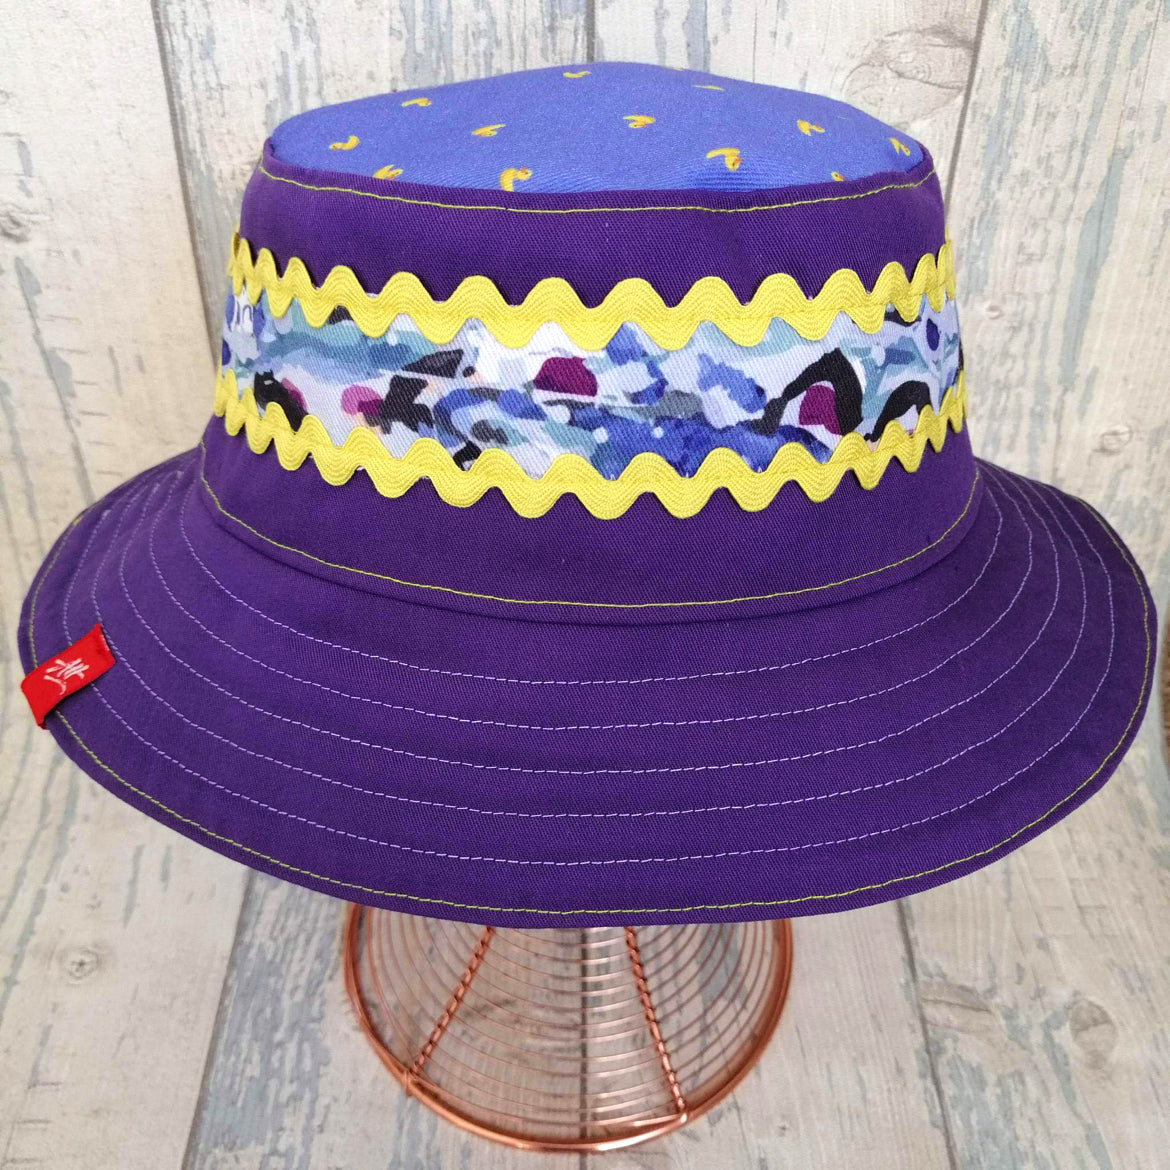 Reversible festival bucket hat in purple with yellow trim and swimmers